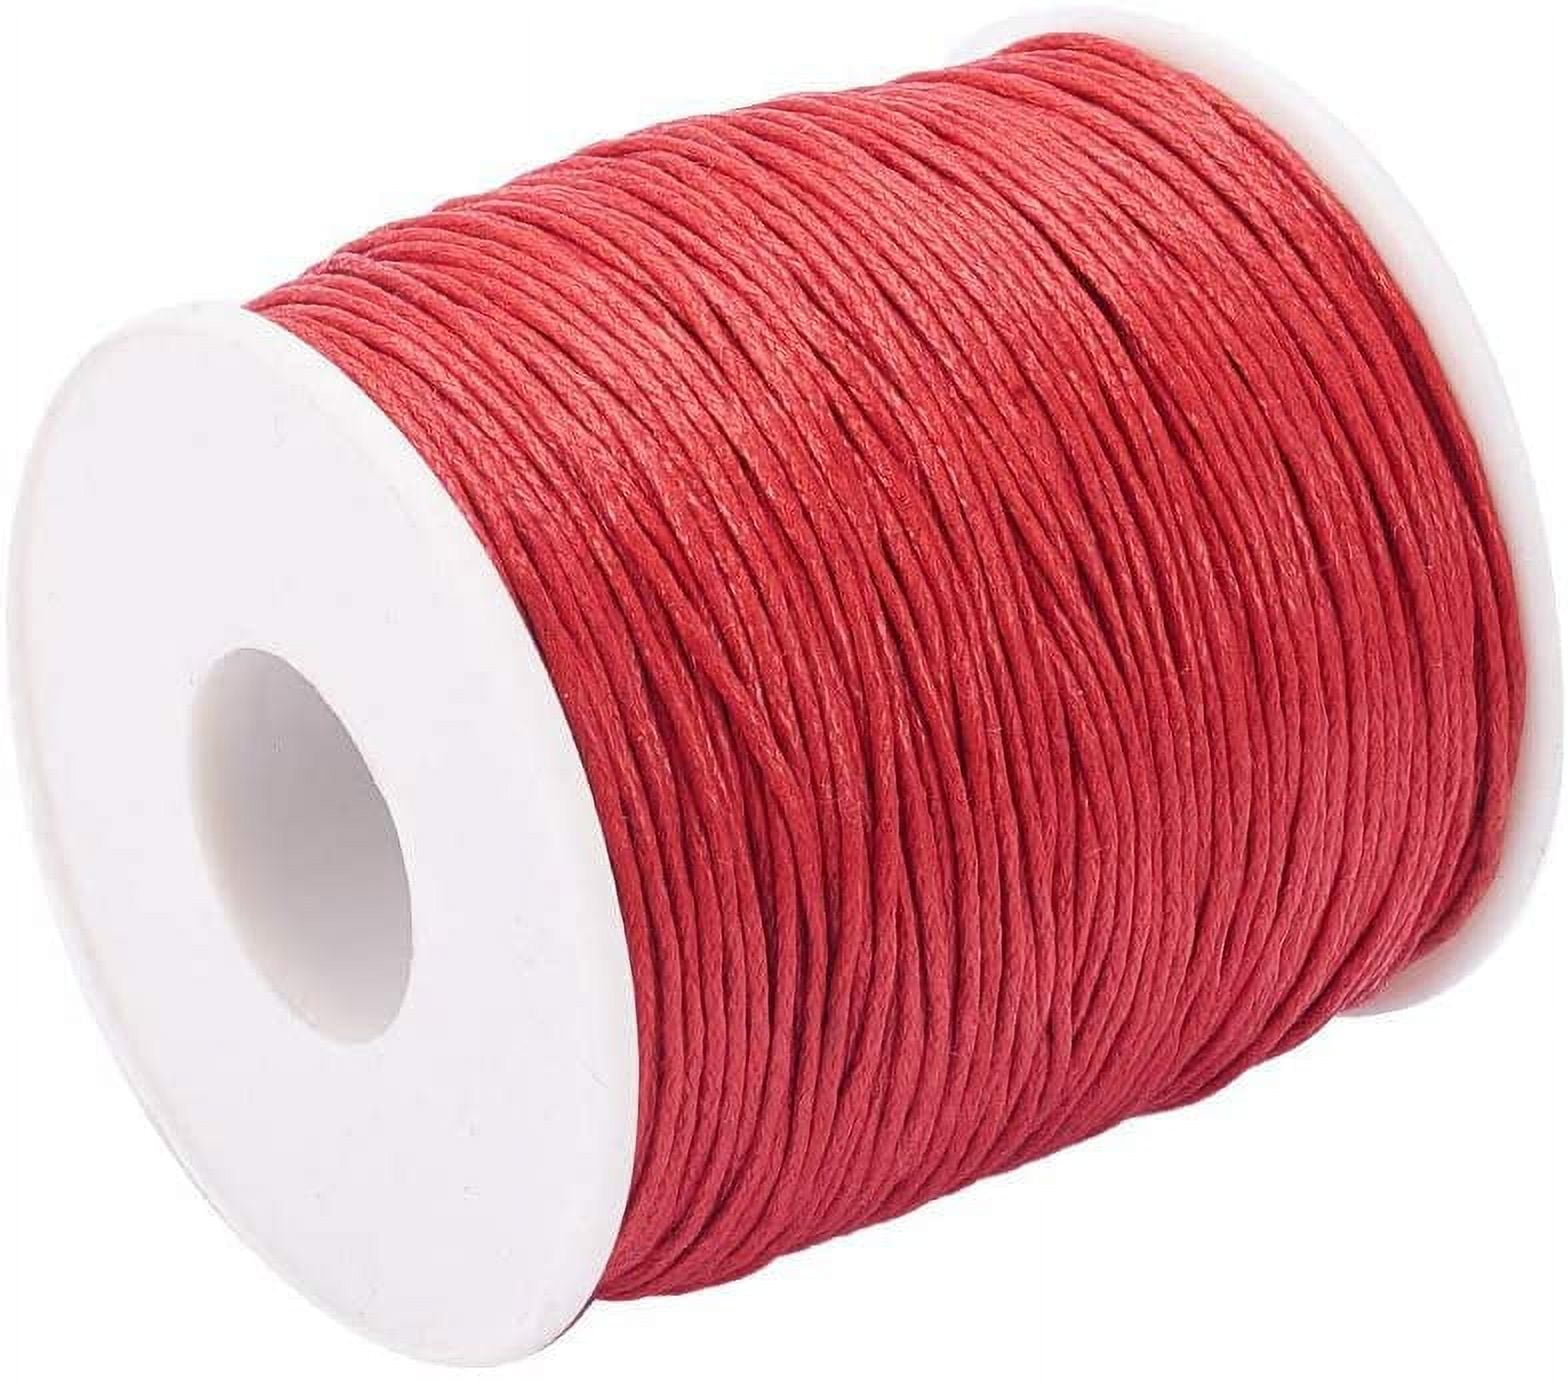 JeogYong 2pcs Waxed Cotton Cord 1mm x 76 Yards Wax String for